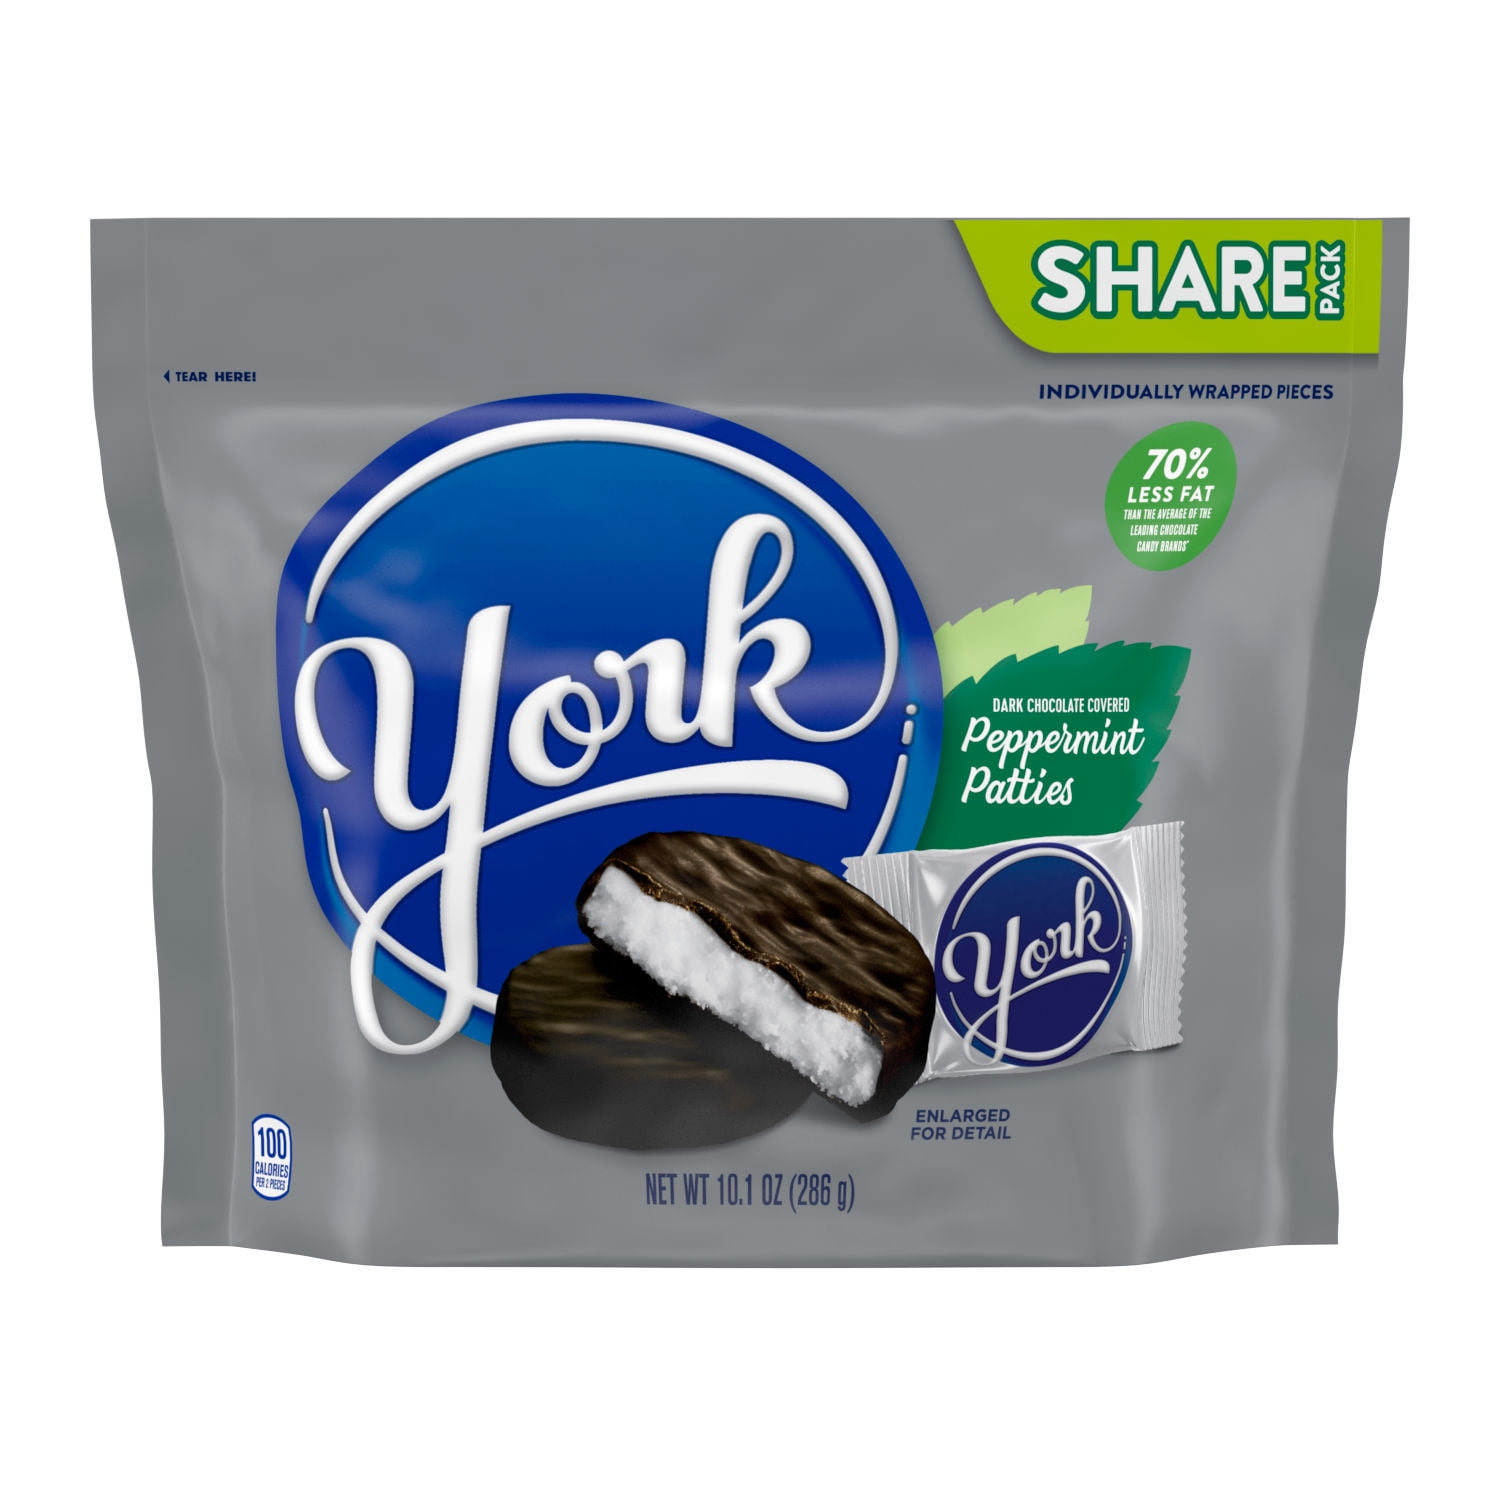 YORK Peppermint Patties Dark Chocolate Candy, Individually Wrapped, 10.1 oz, Share Bag